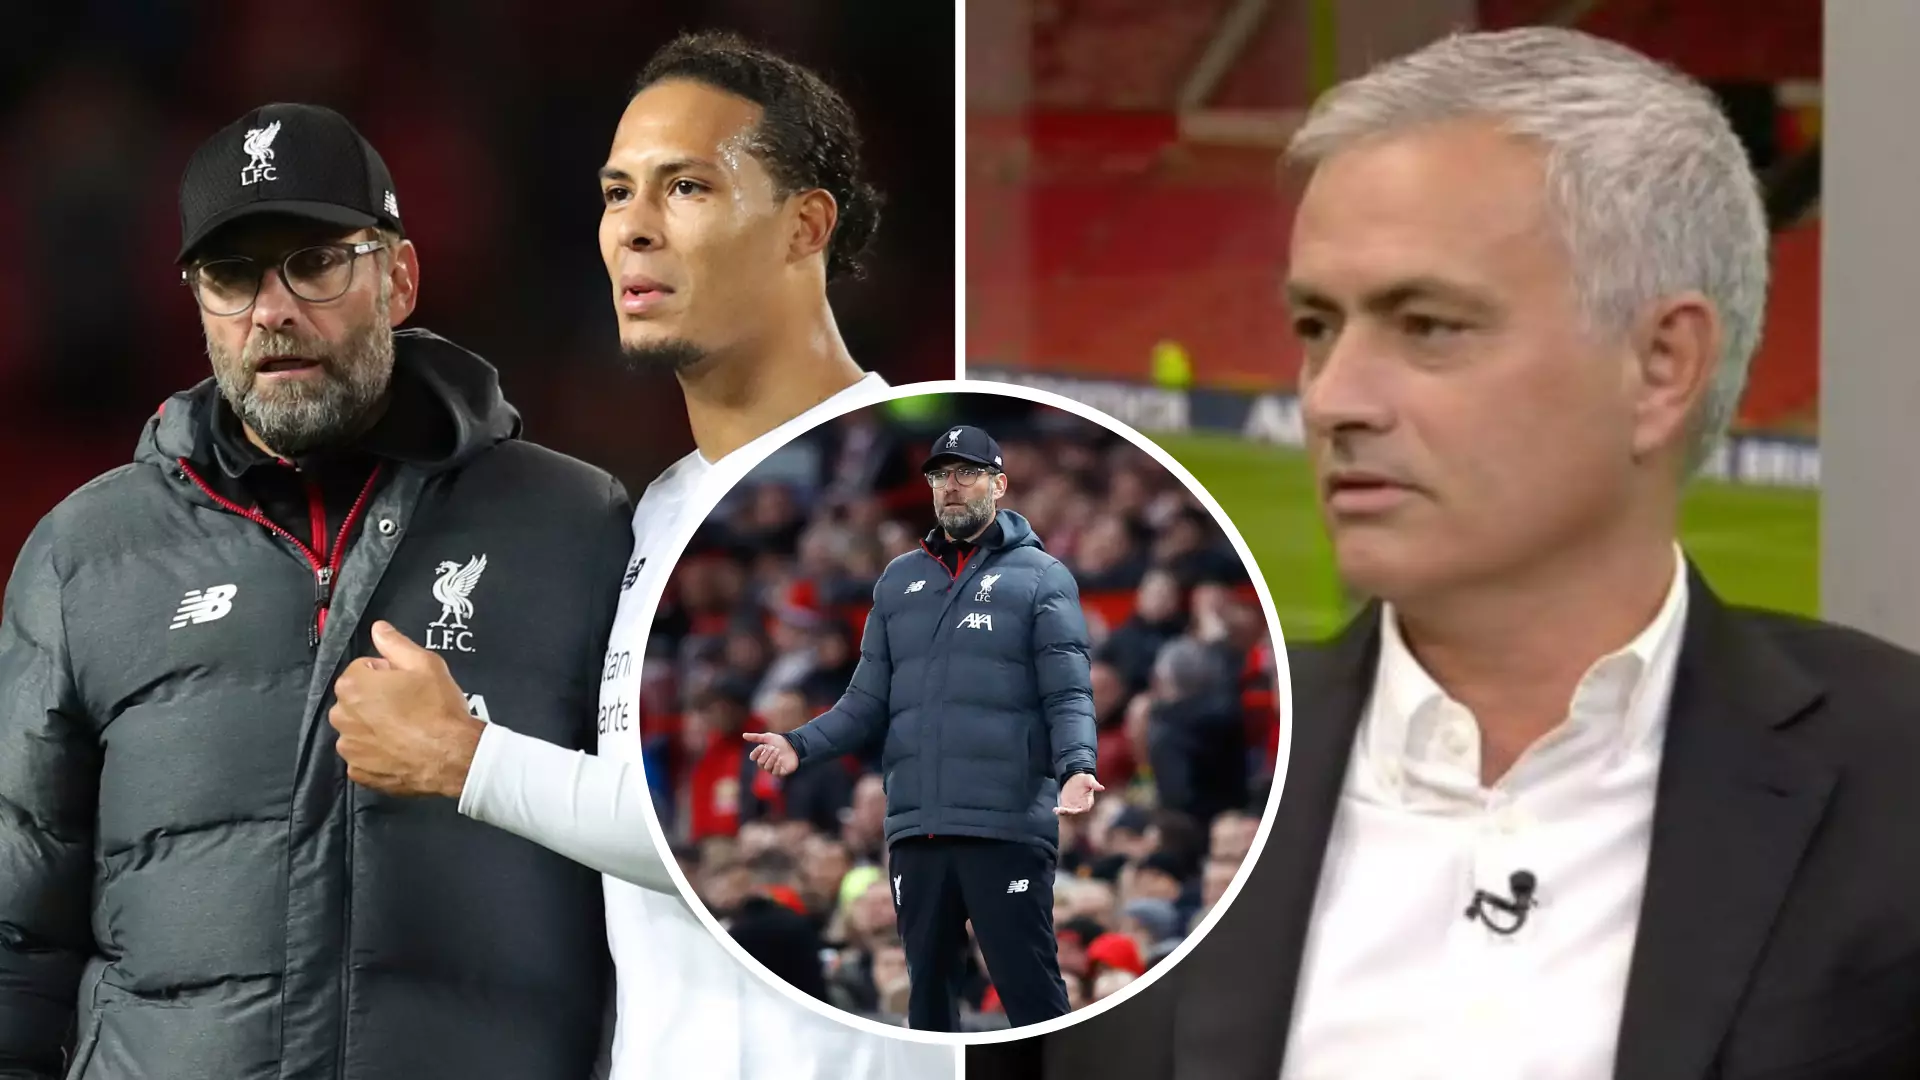 Jose Mourinho Trolled Jurgen Klopp For Complaining About Manchester United’s 'Defensive' Approach